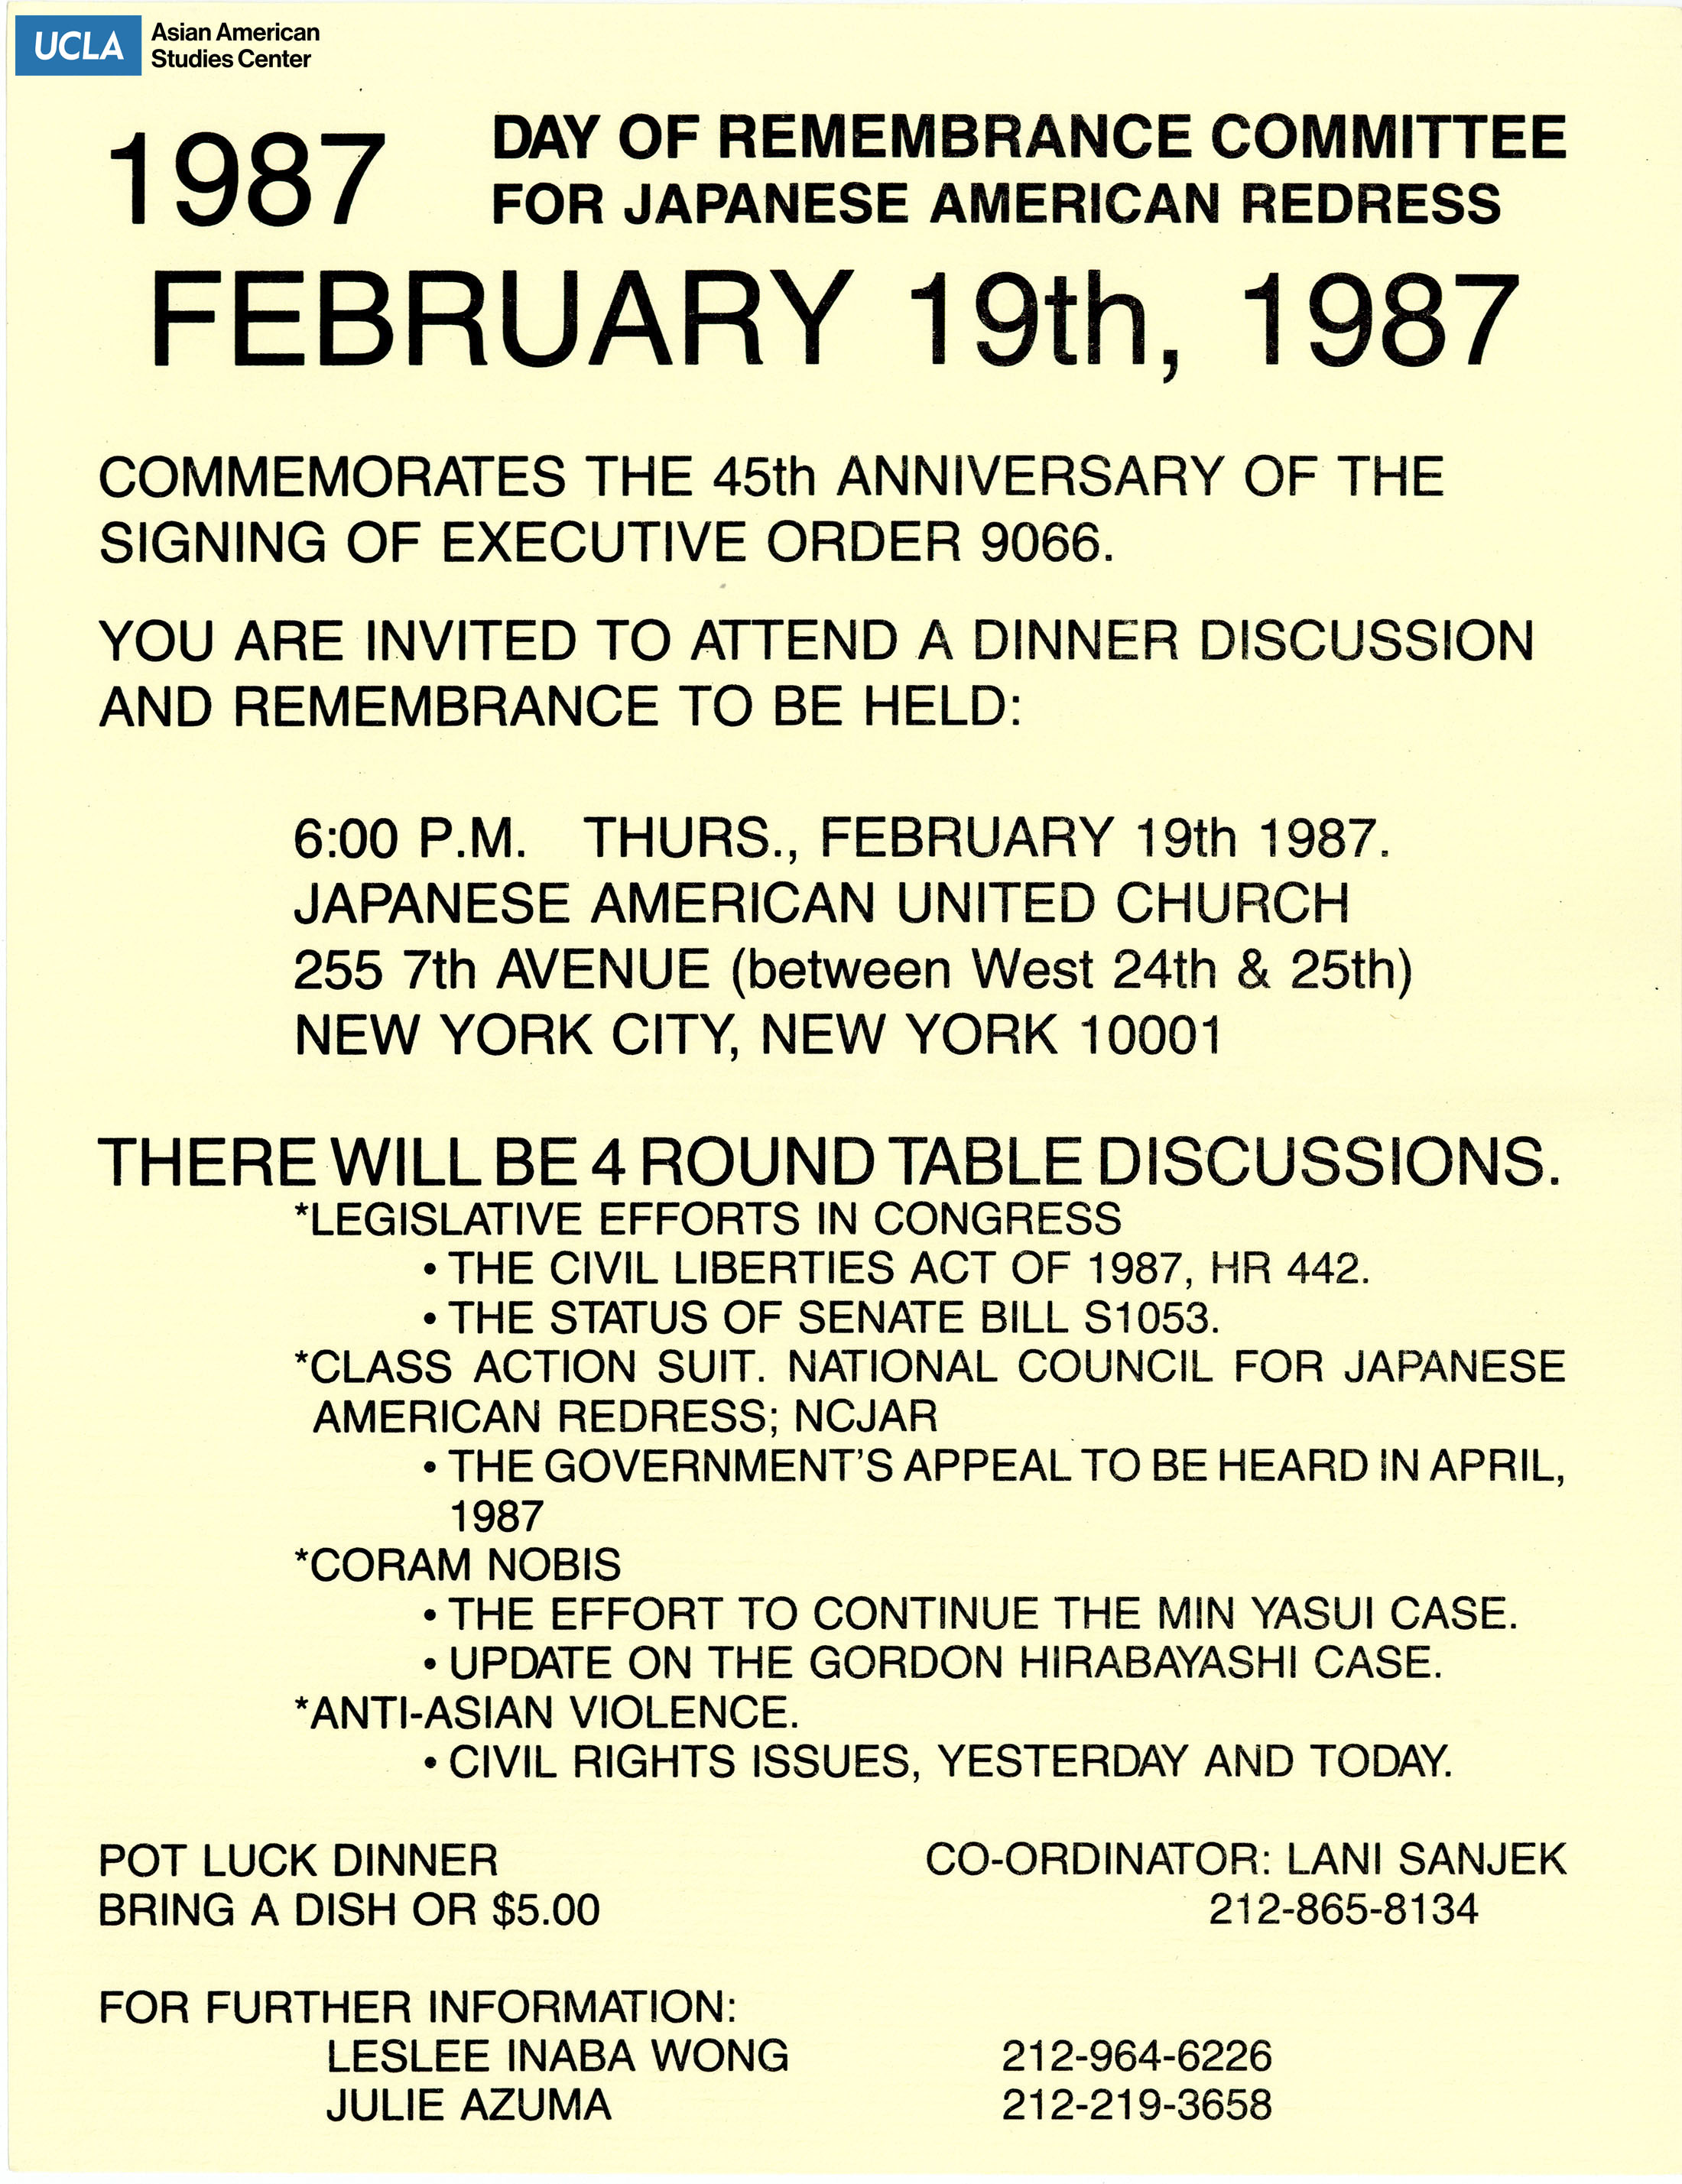 Flyer regarding the 1987 Day of Remembrance which commemorates the 45th anniversary since the signing of Executive Order 9066.